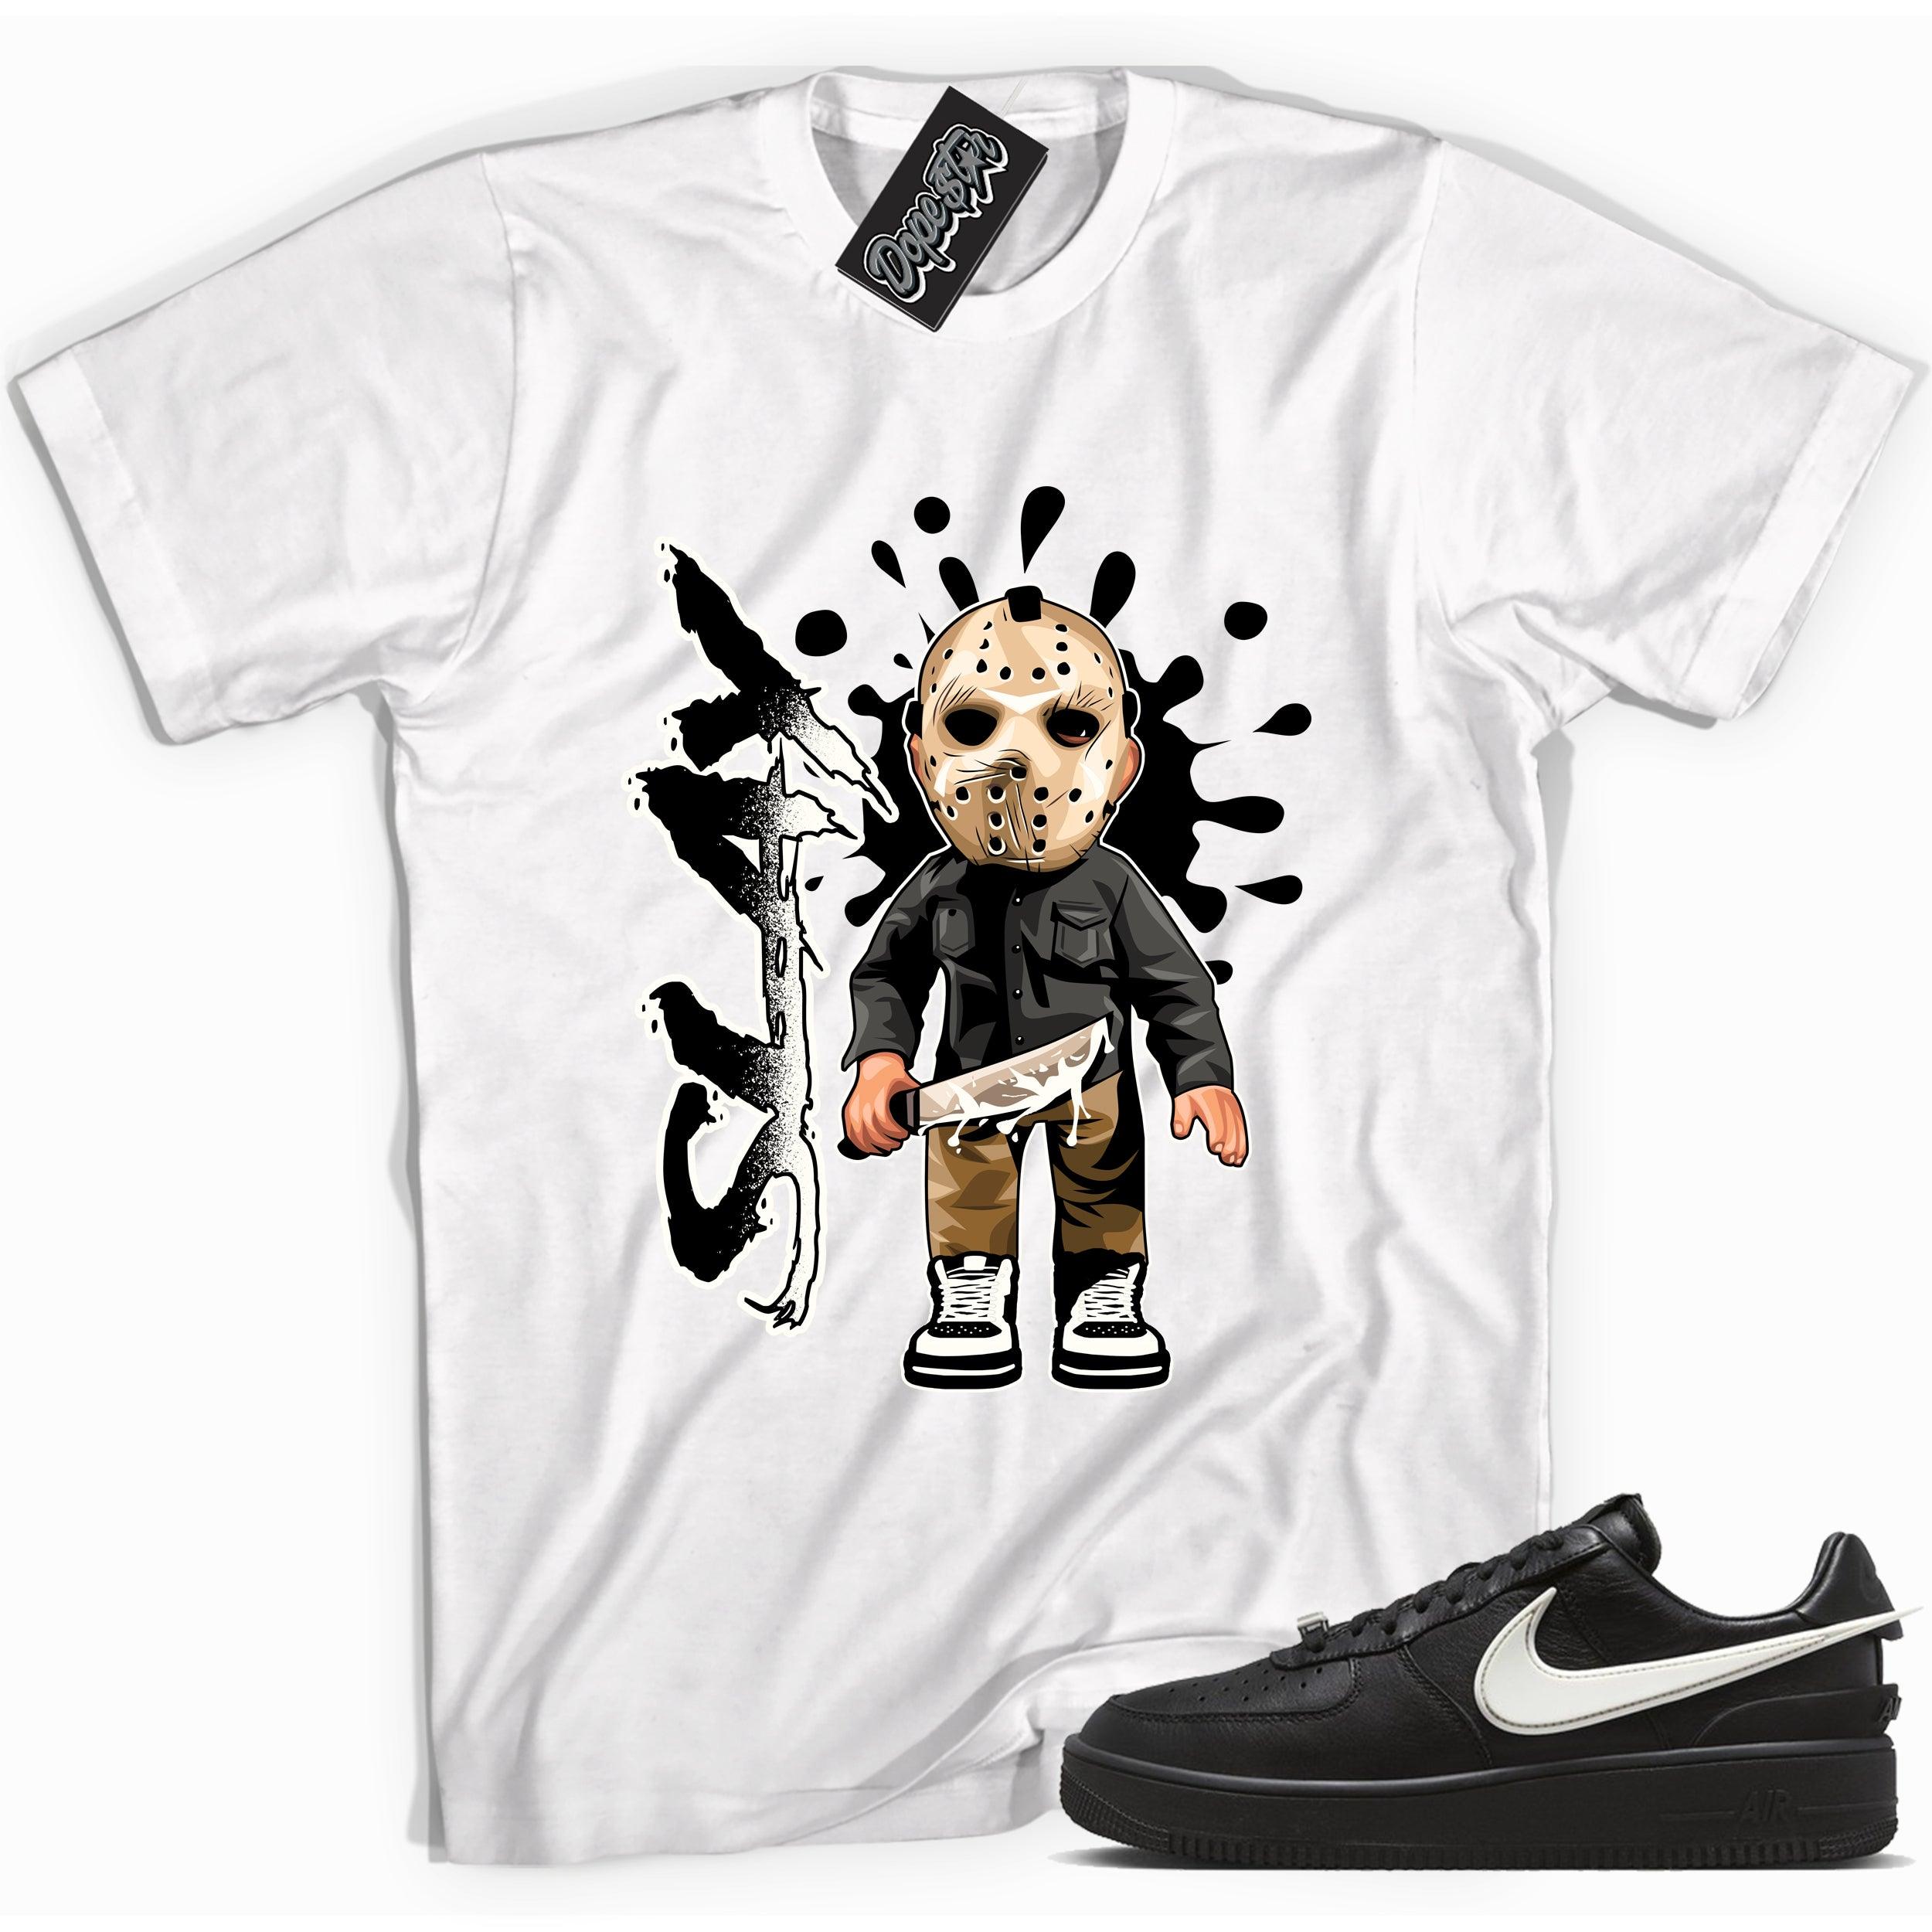 Cool white graphic tee with 'slay' print, that perfectly matches Nike Air Force 1 Low SP Ambush Phantom sneakers.v